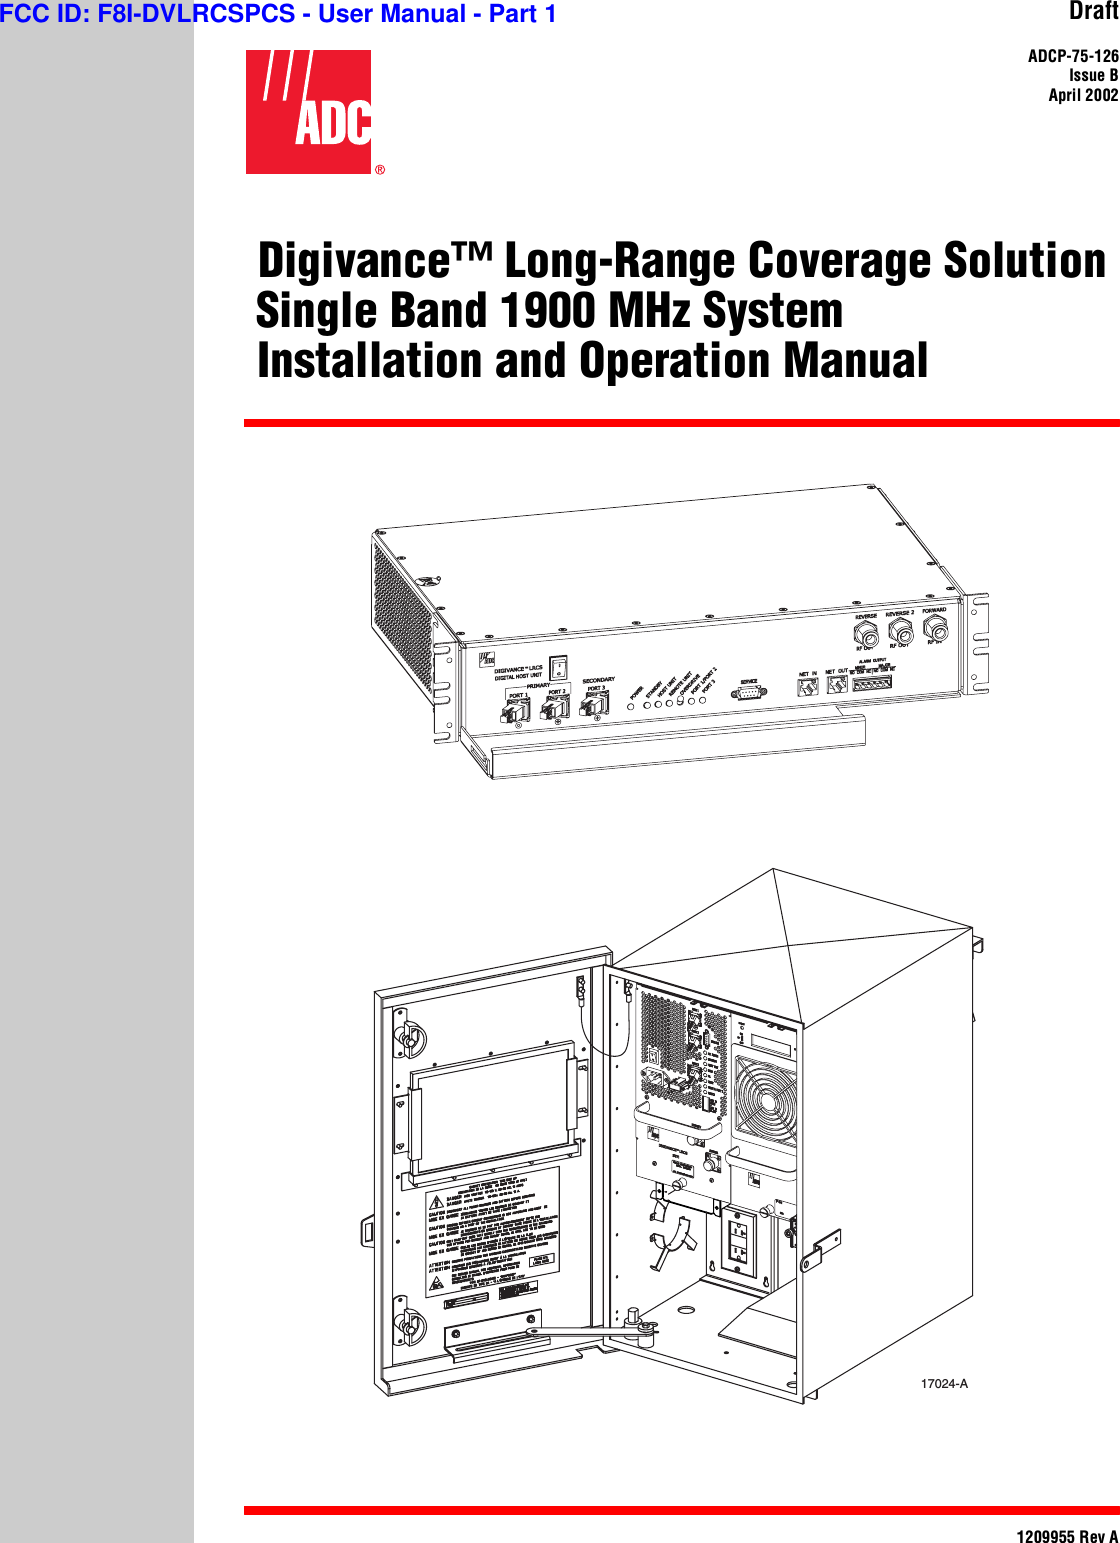 DraftADCP-75-126Issue BApril 20021209955 Rev A(Digivance™ Long-Range Coverage Solution Single Band 1900 MHz System(Installation and Operation Manual17024-AFCC ID: F8I-DVLRCSPCS - User Manual - Part 1